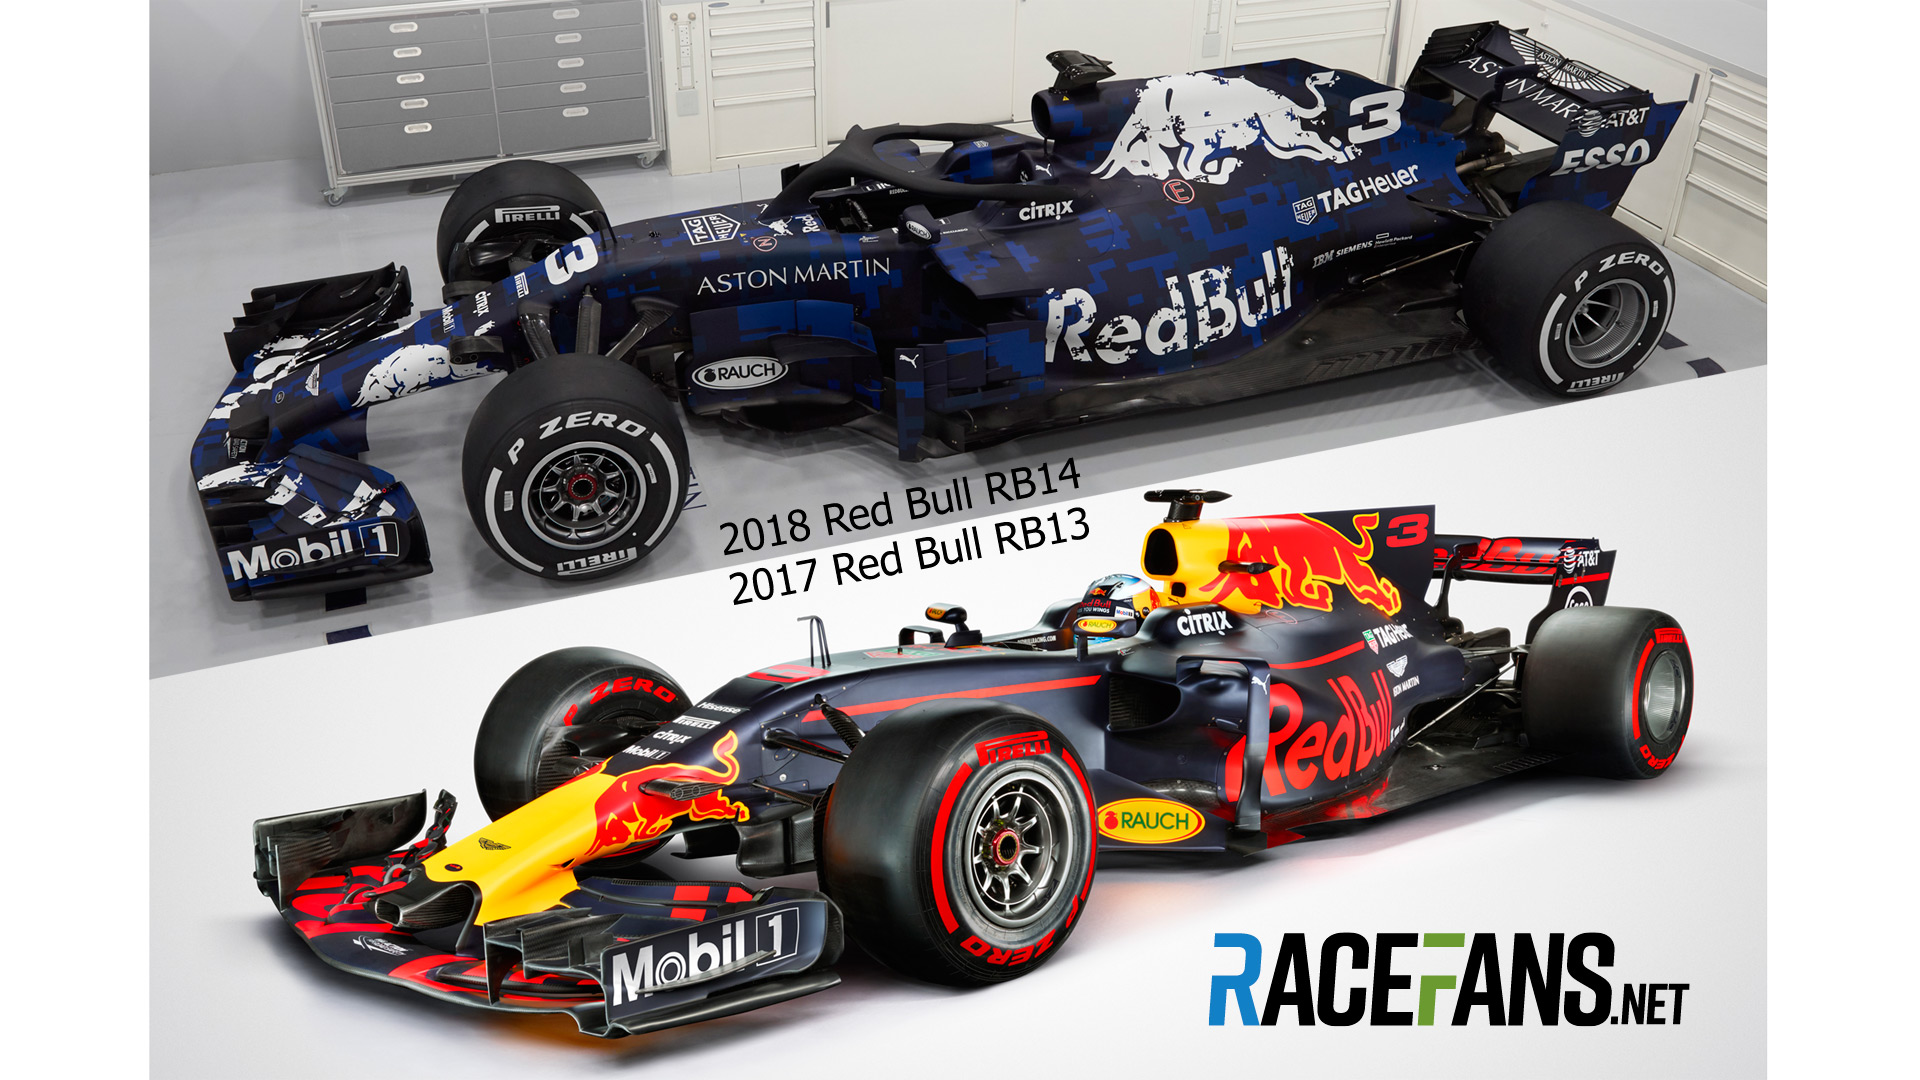 Electrician Disturbance Compressed Compare the new 2018 Red Bull with last year's car · RaceFans